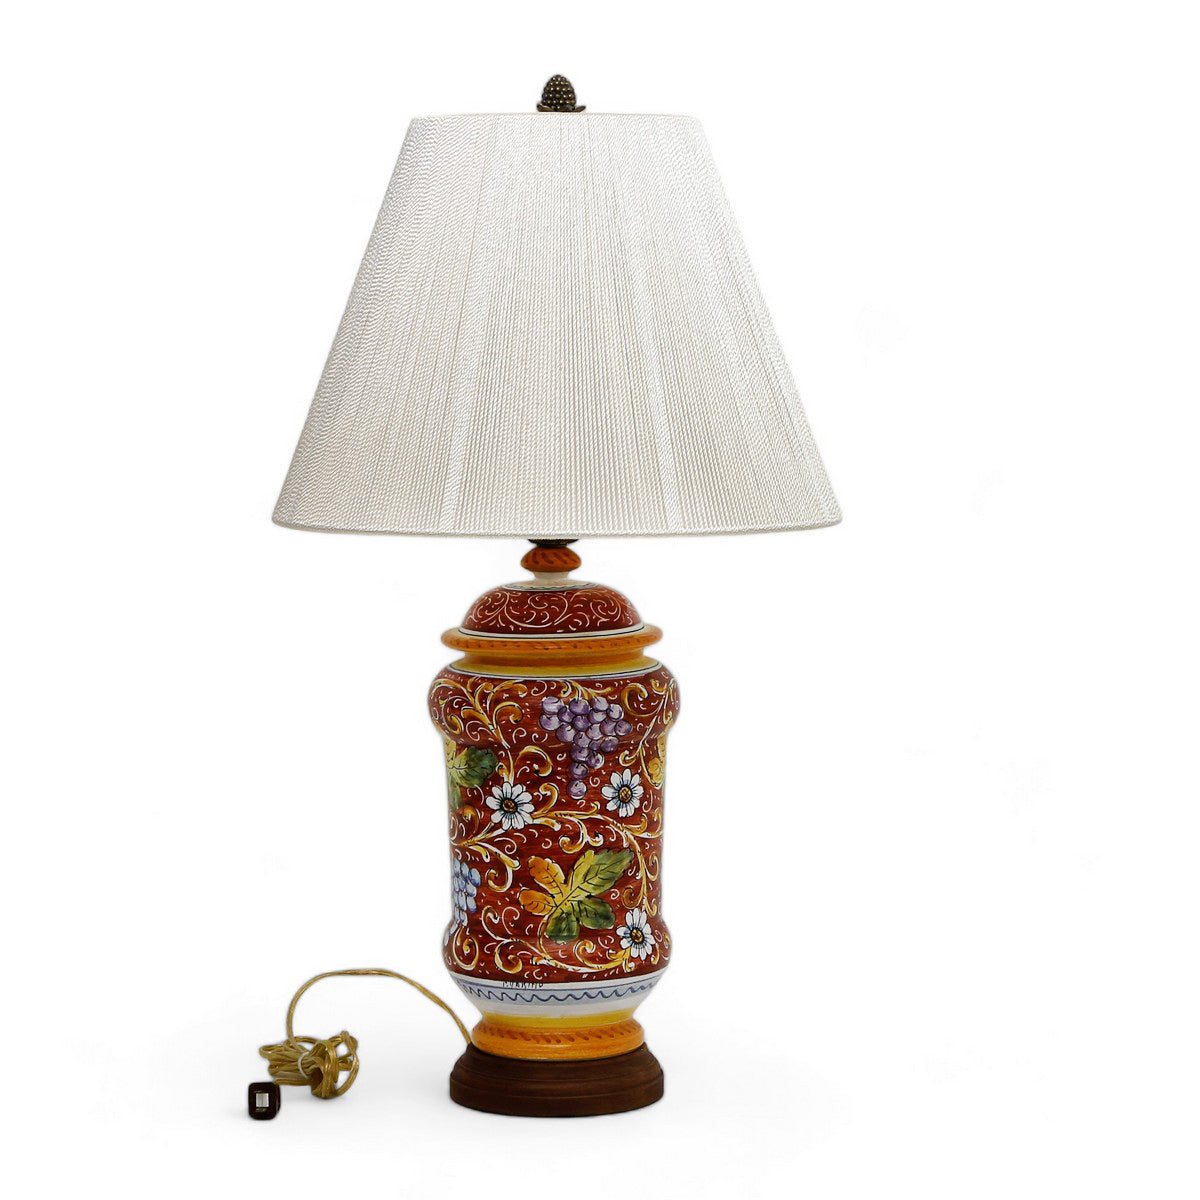 TUSCAN MAJOLICA: Hand Painted Ceramic Lamp with Off White Luxury Silk Shade